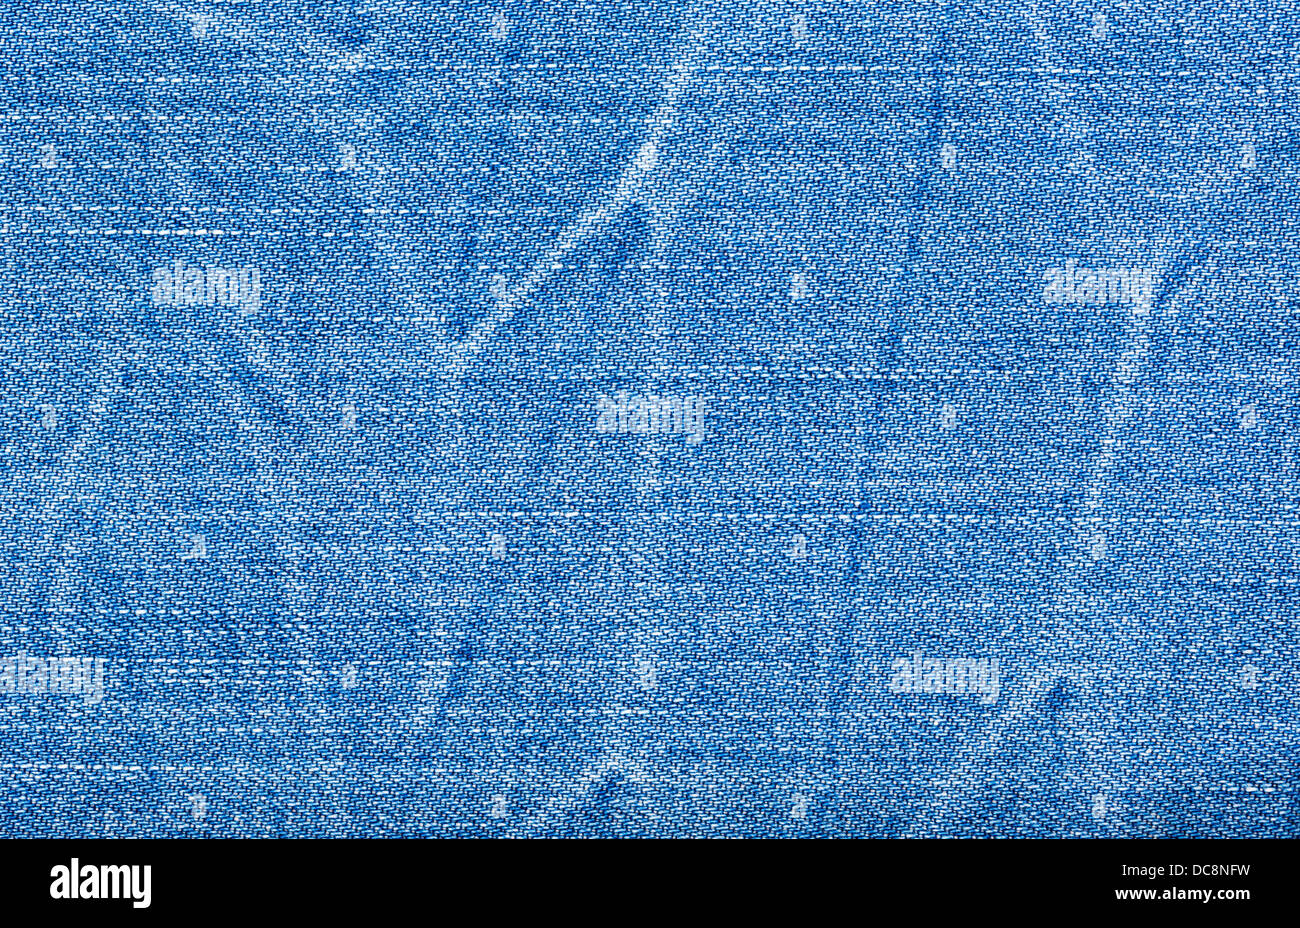 Light Blue Washed Faded Denim Fabric Texture Swatch Stock Photo ...